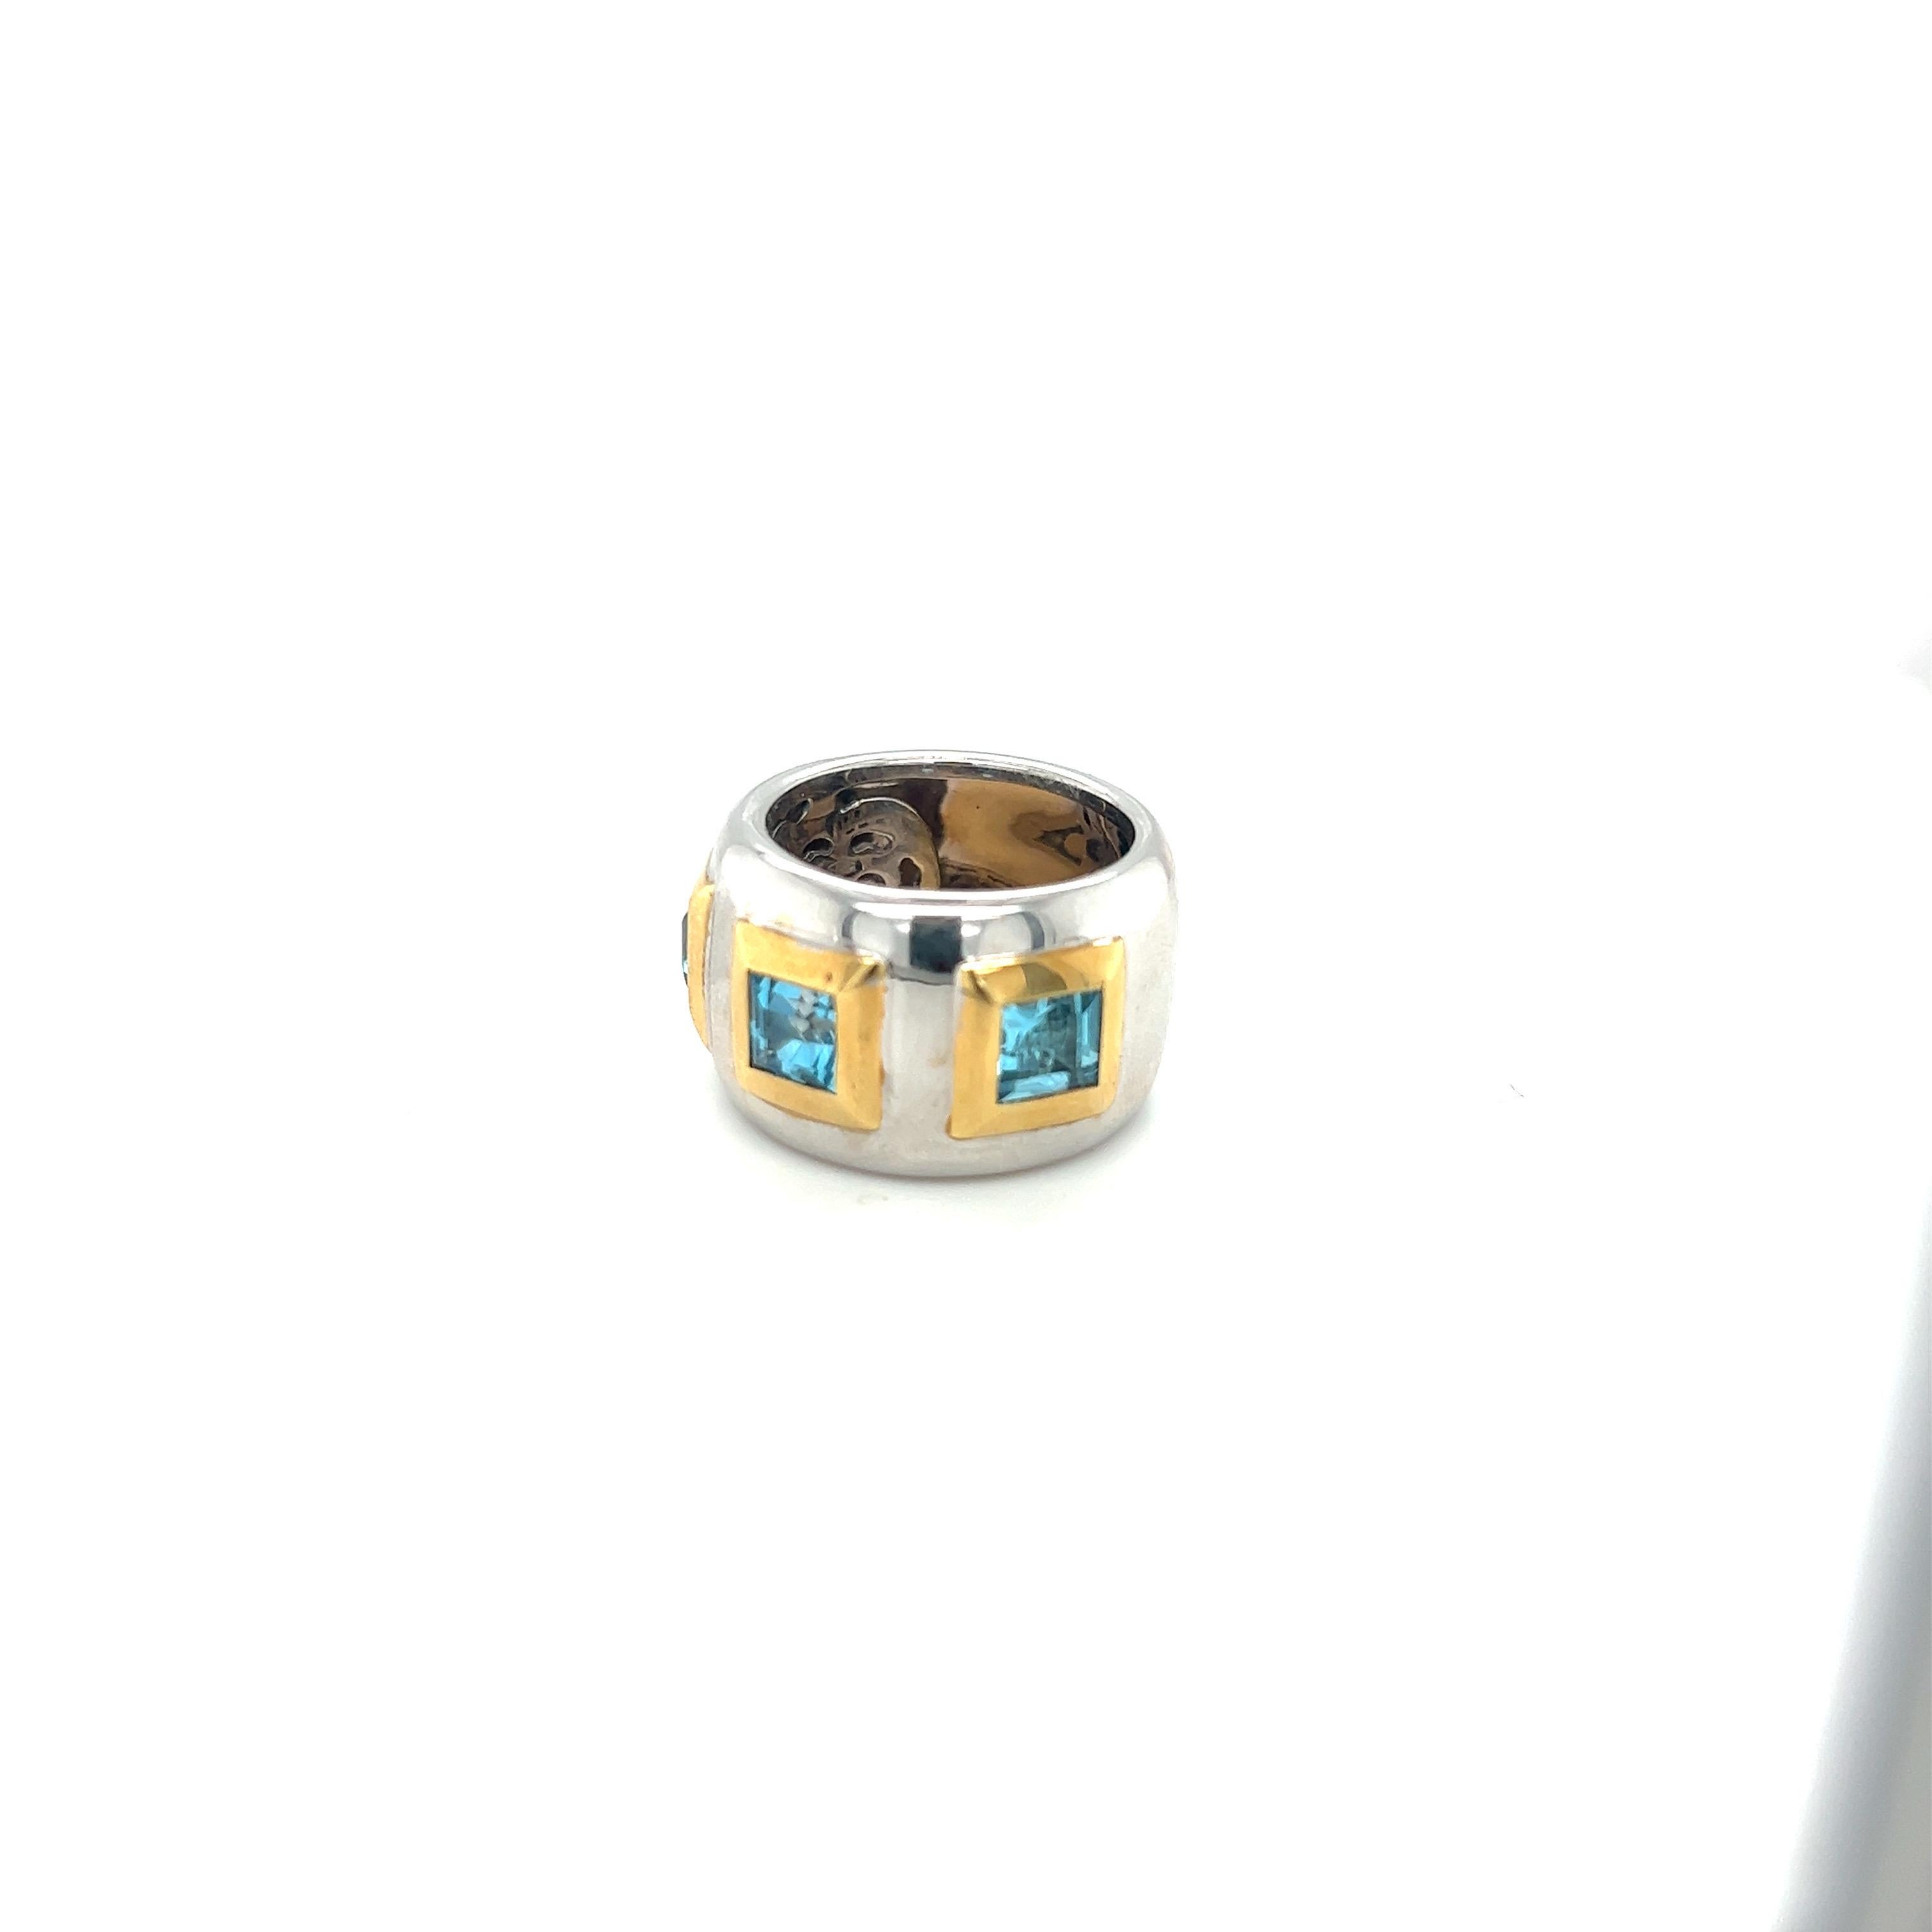 Modern band ring crafted in 18 karat white gold. The band features 3 square emerald cut blue topaz stones set in 18 karat yellow gold wide bezels.
The band measures 14mm in width and is finger size 7
Stamped 750